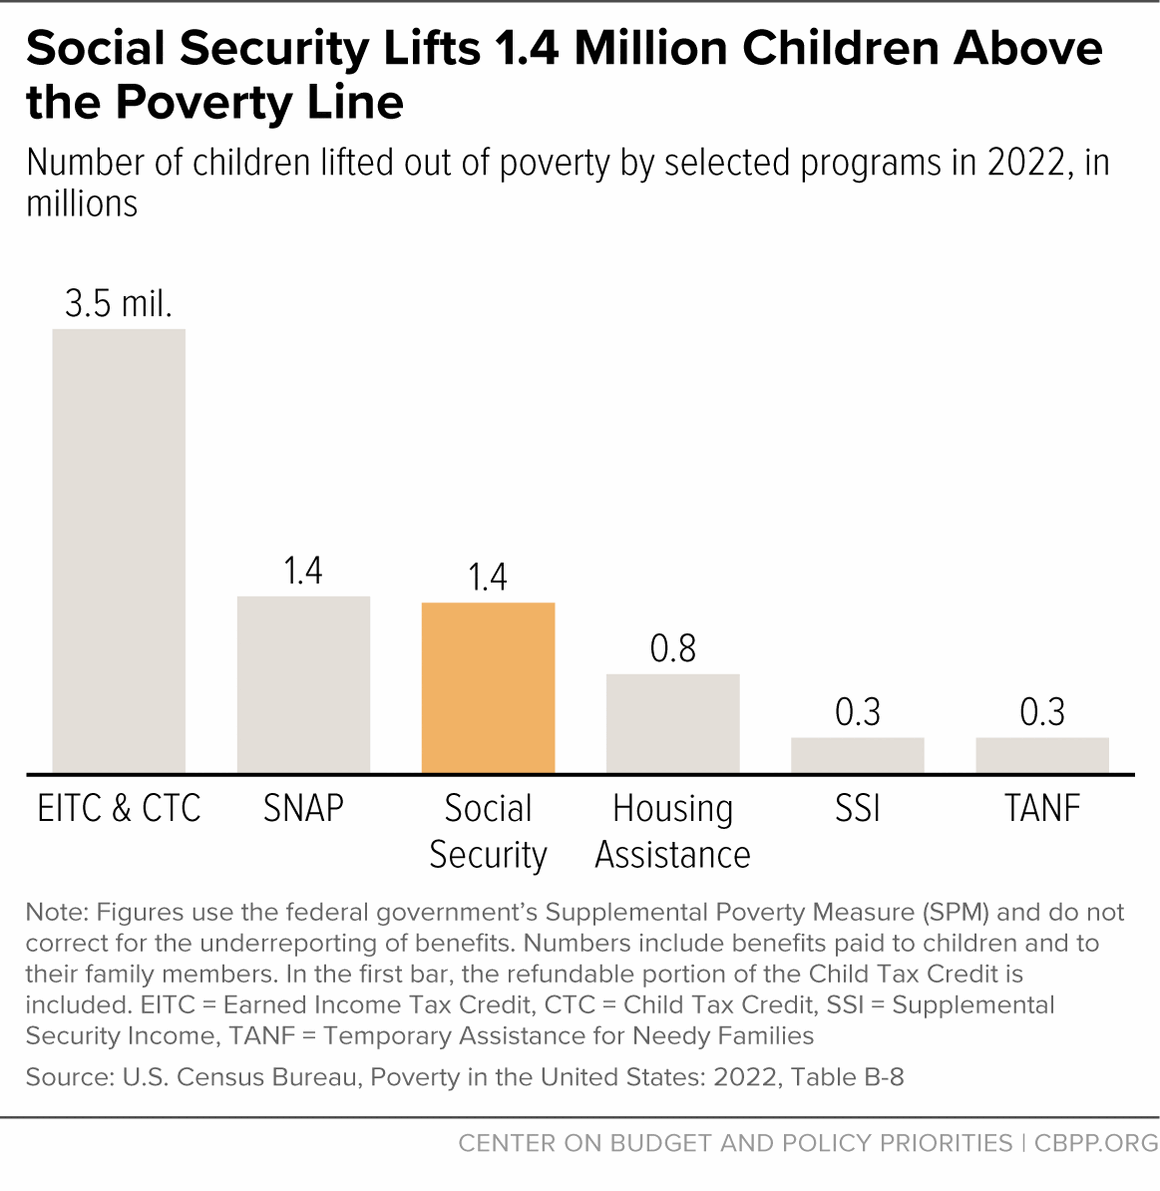 Social Security Lifts 1.4 Million Children Above the Poverty Line